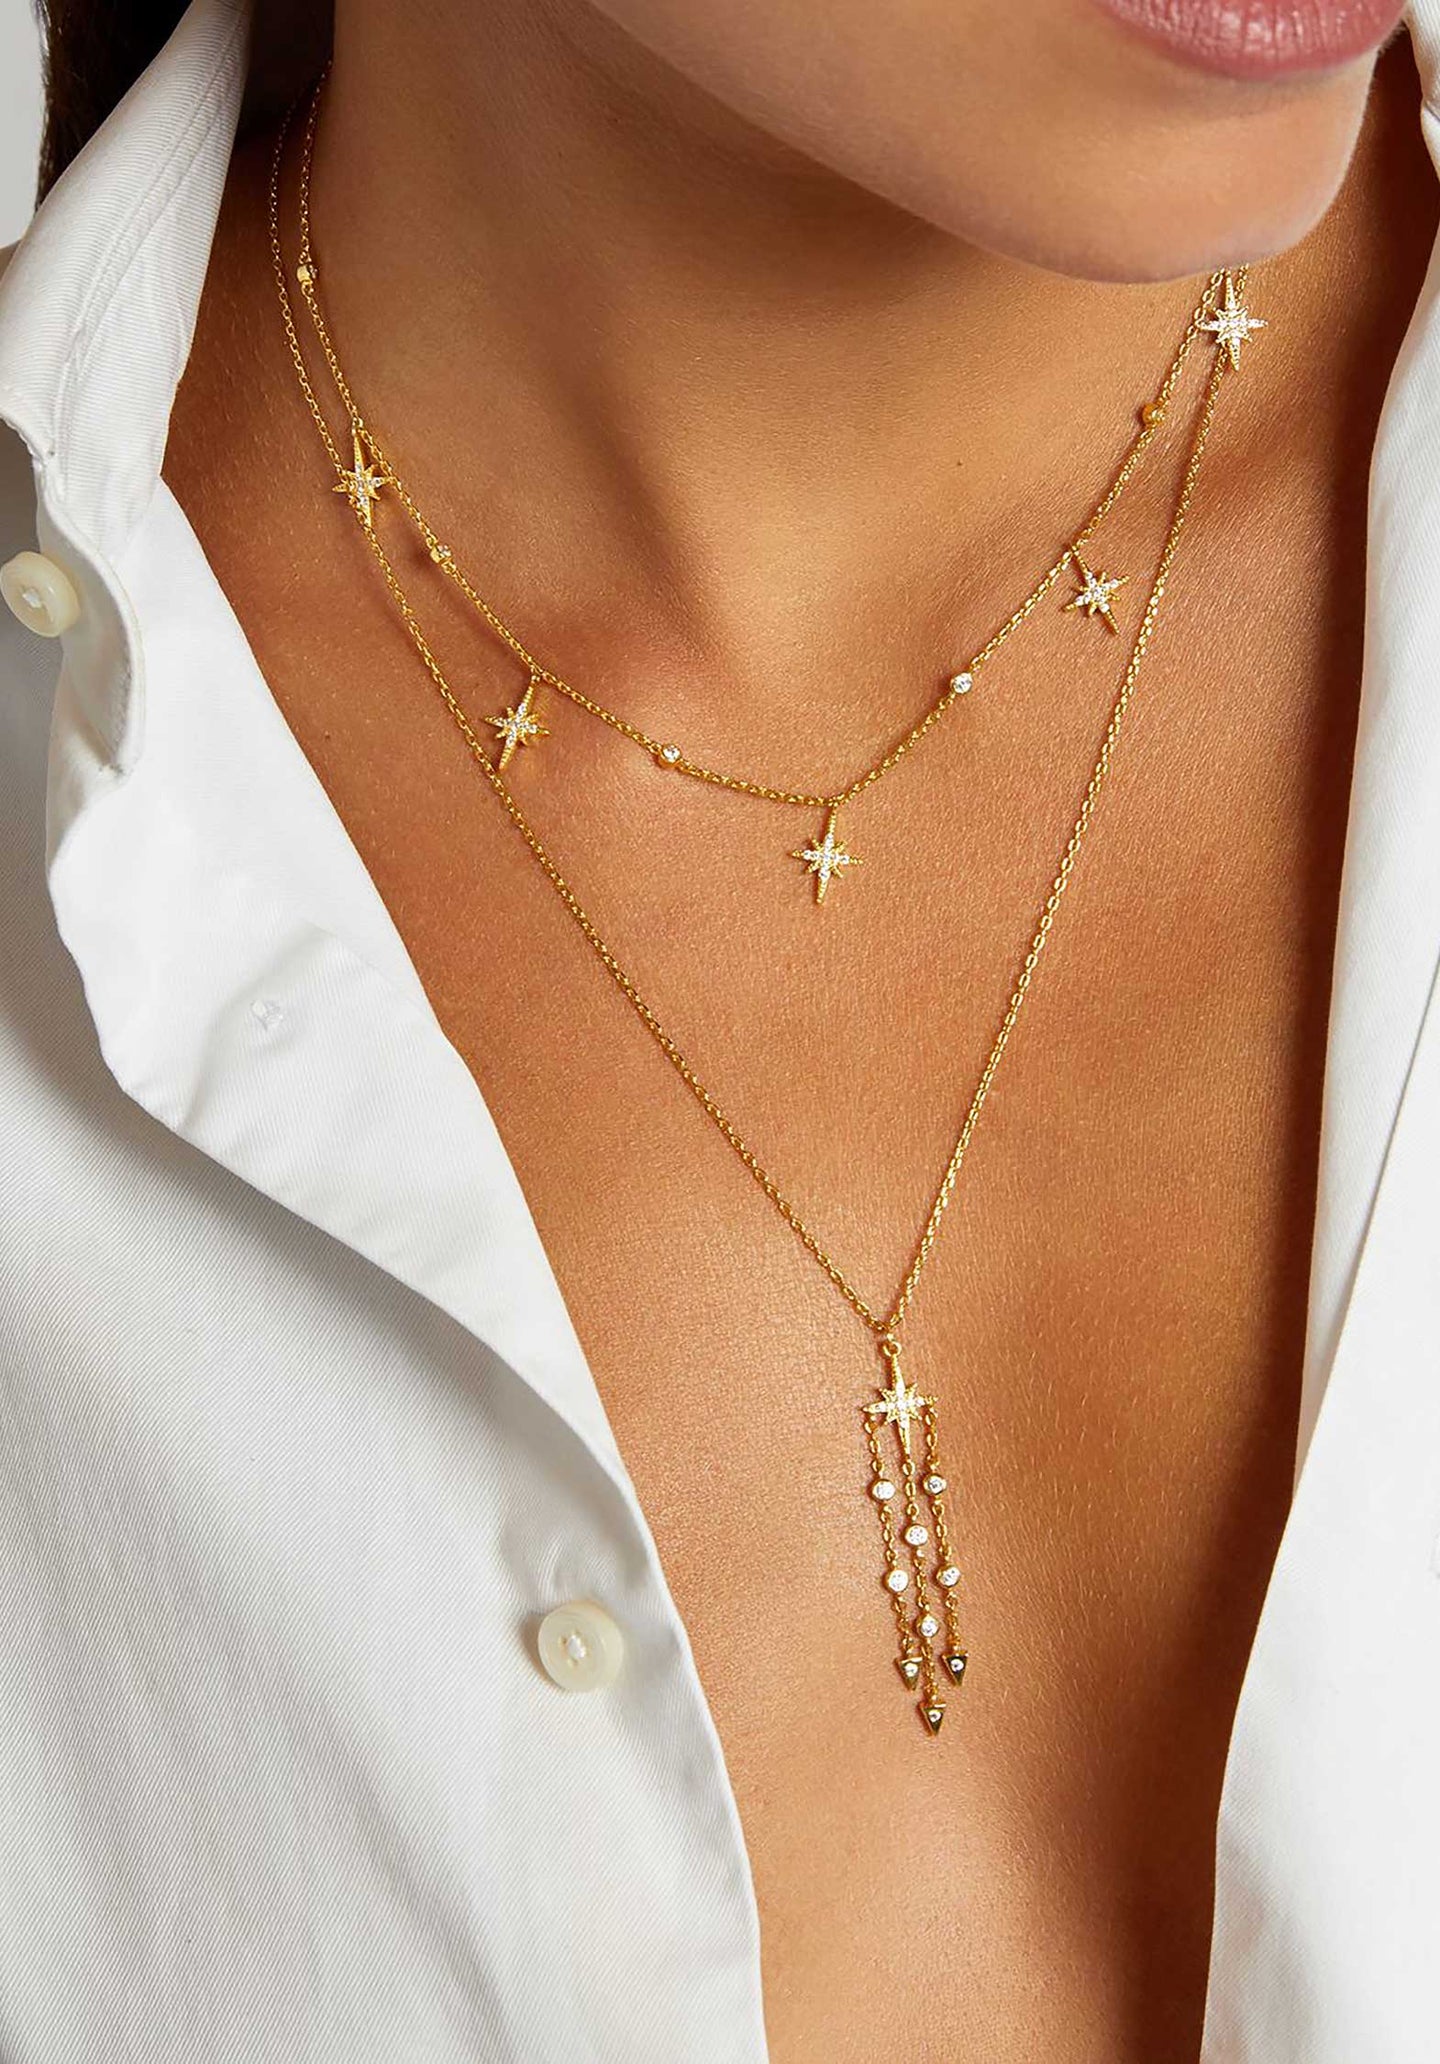 Necklace Constellation Co-231g Gold